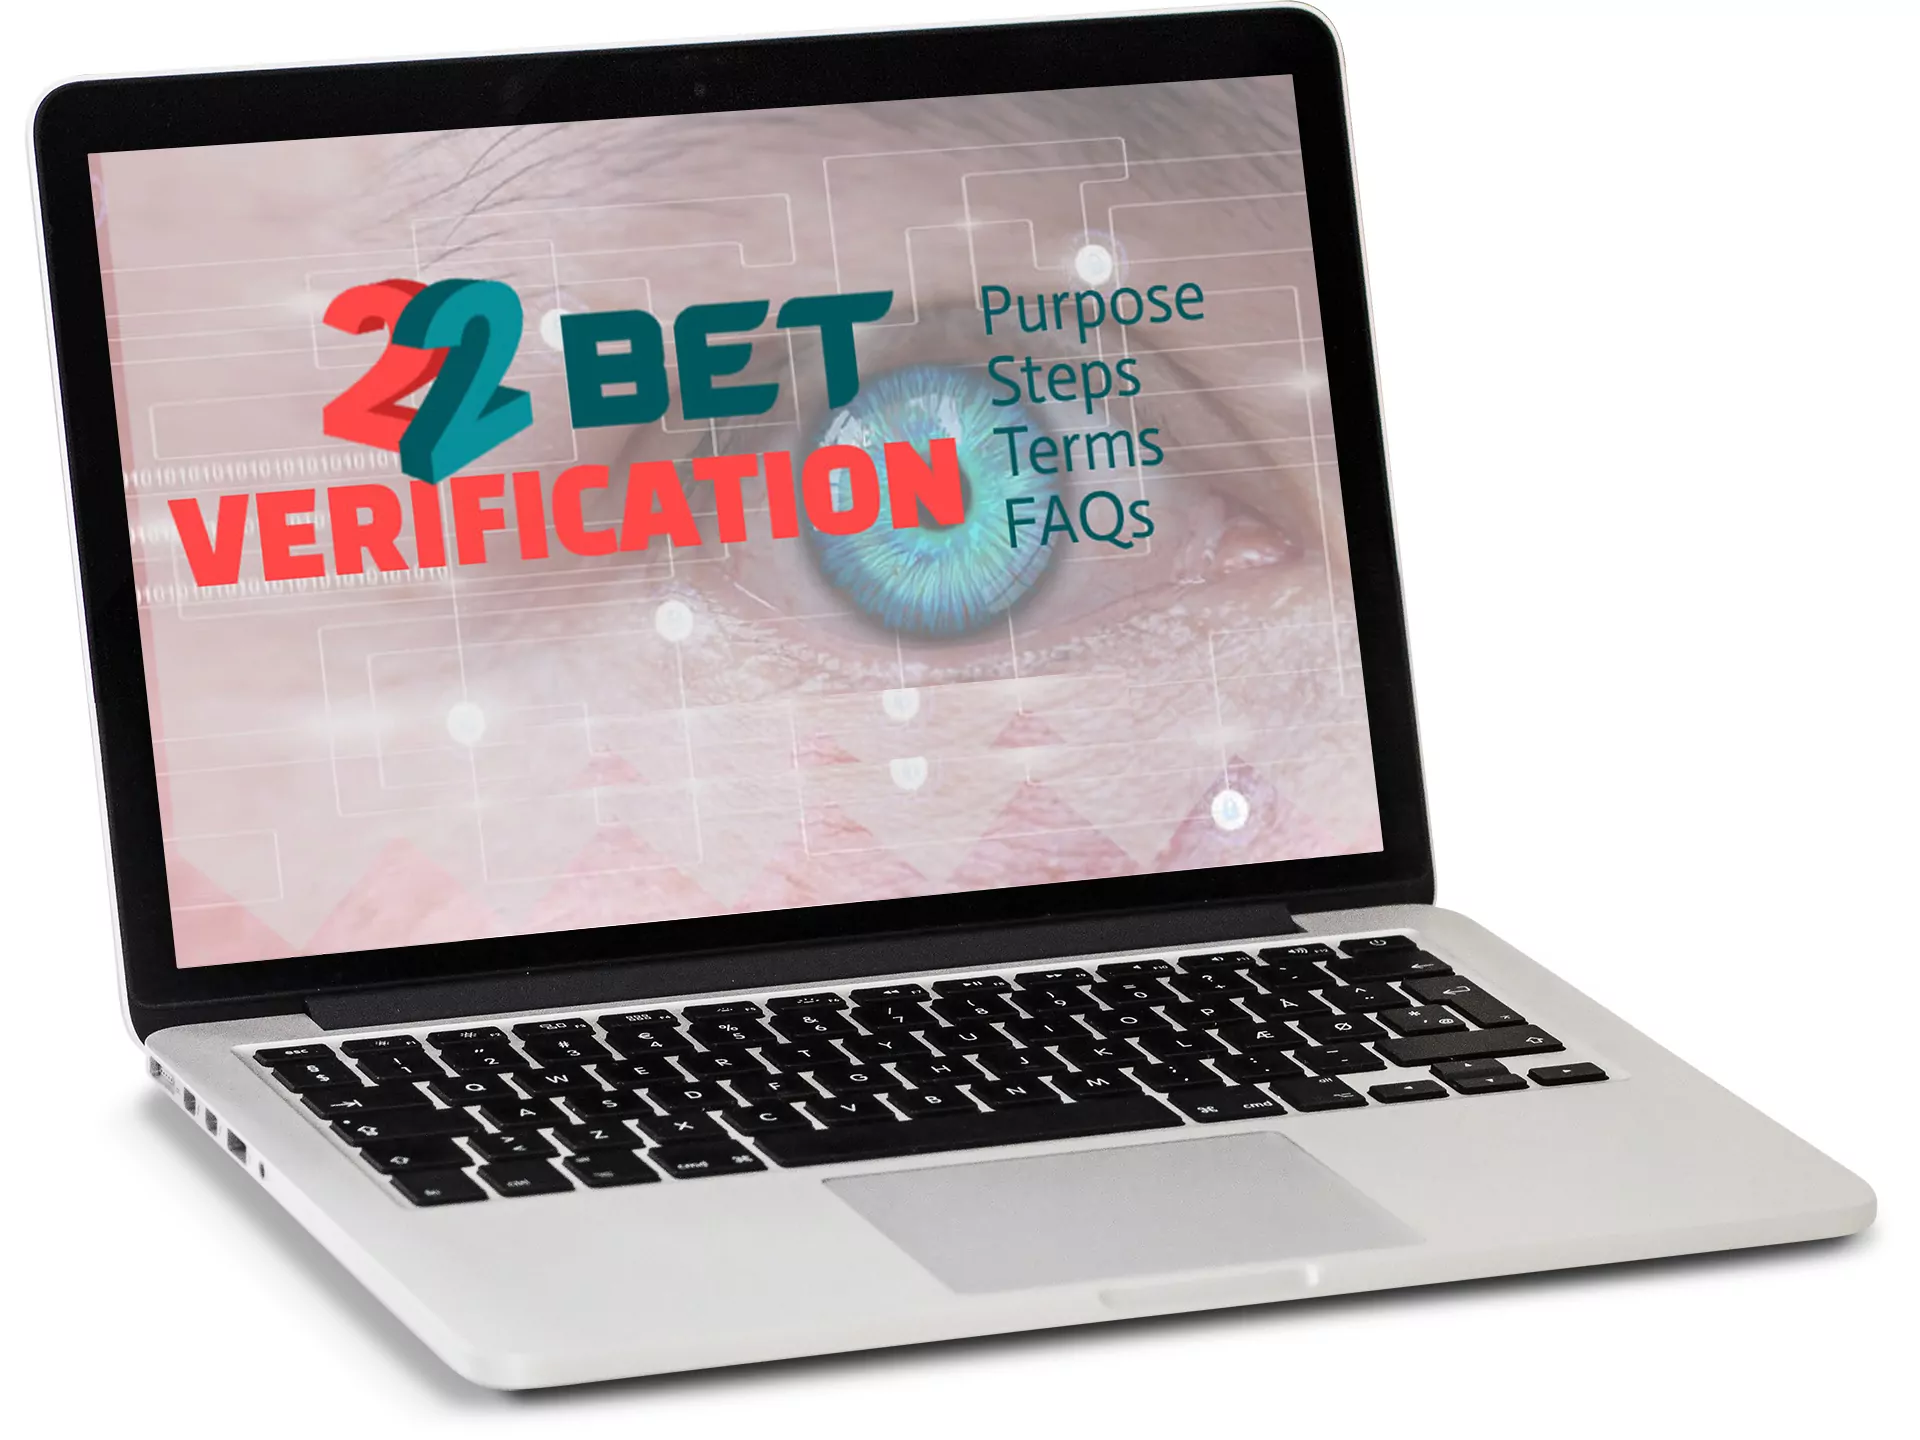 Verification on the 22bet website – step-by-step instruction.